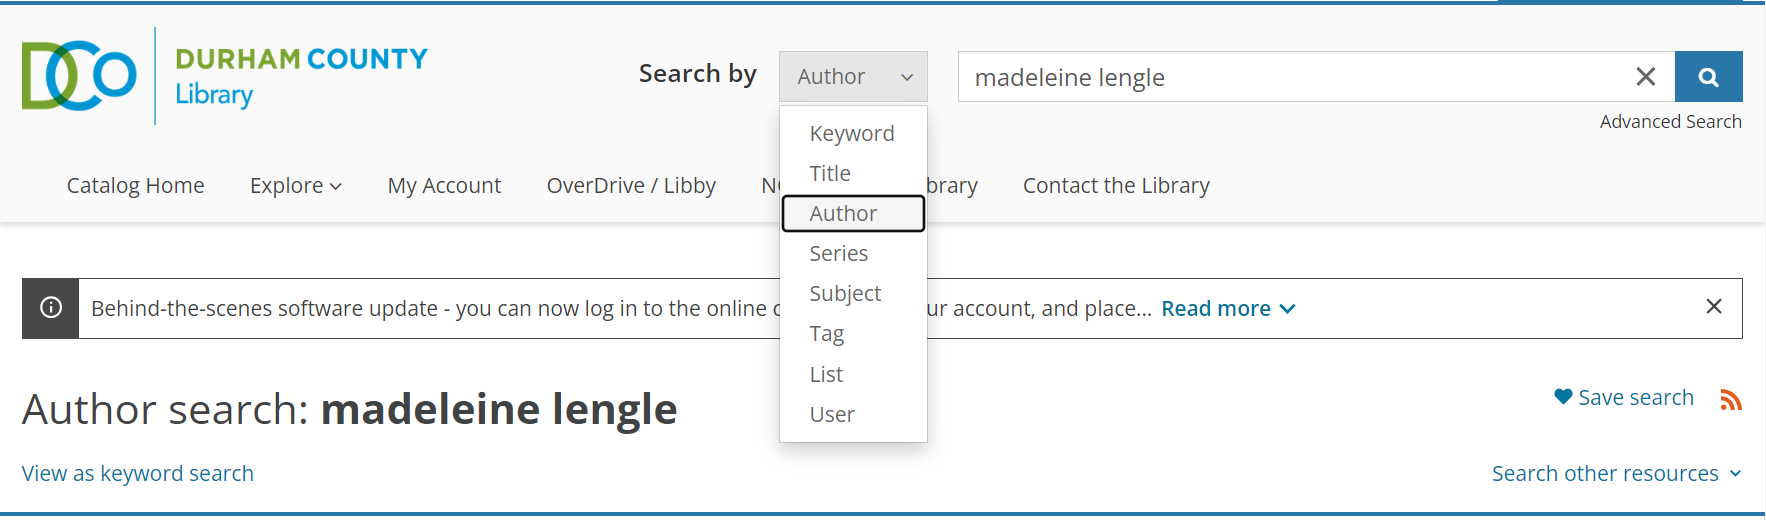 Search with "search by" dropdown toggled to author